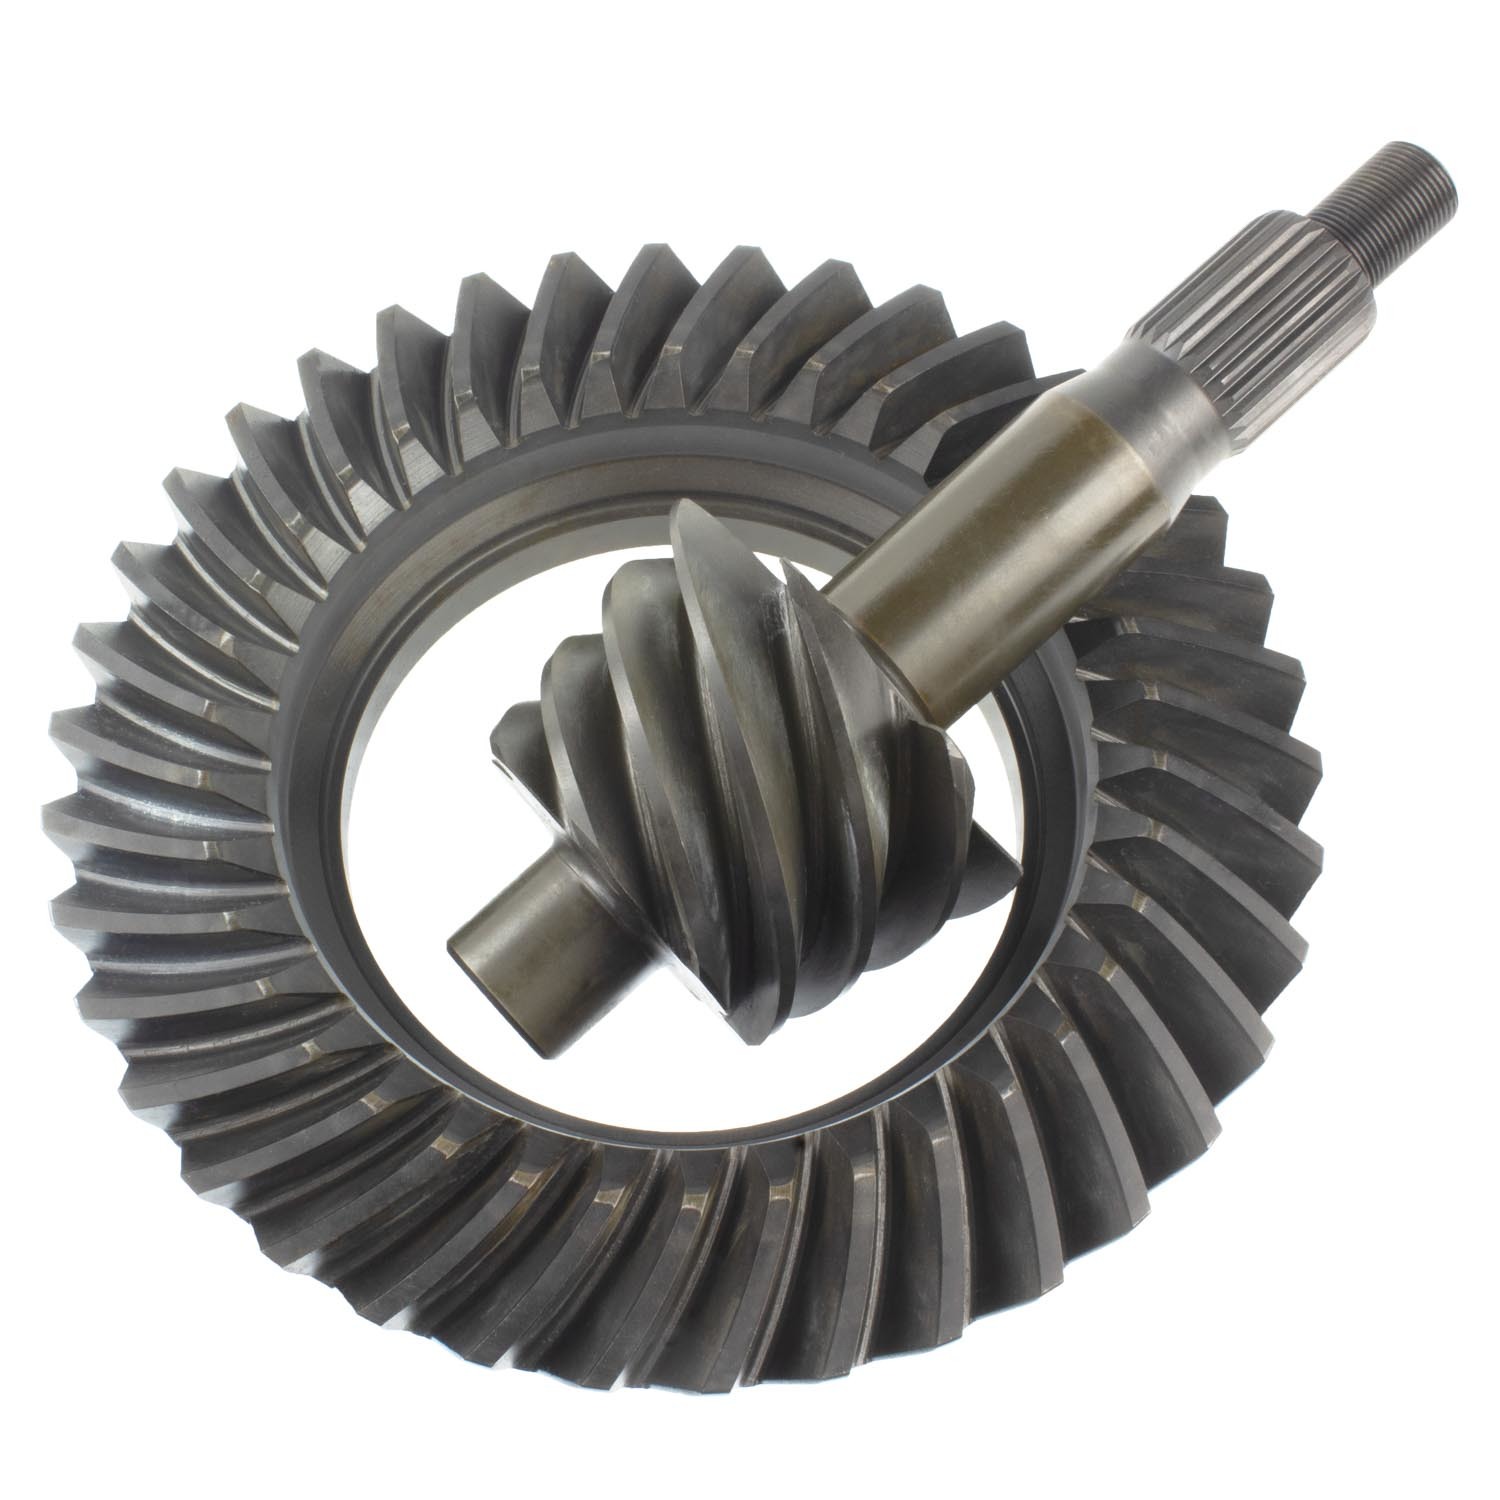 Richmond Gear F9543 - Ring and Pinion, Excel, 5.43 Ratio, 28 Spline Pinion, Ford 9 in, Kit